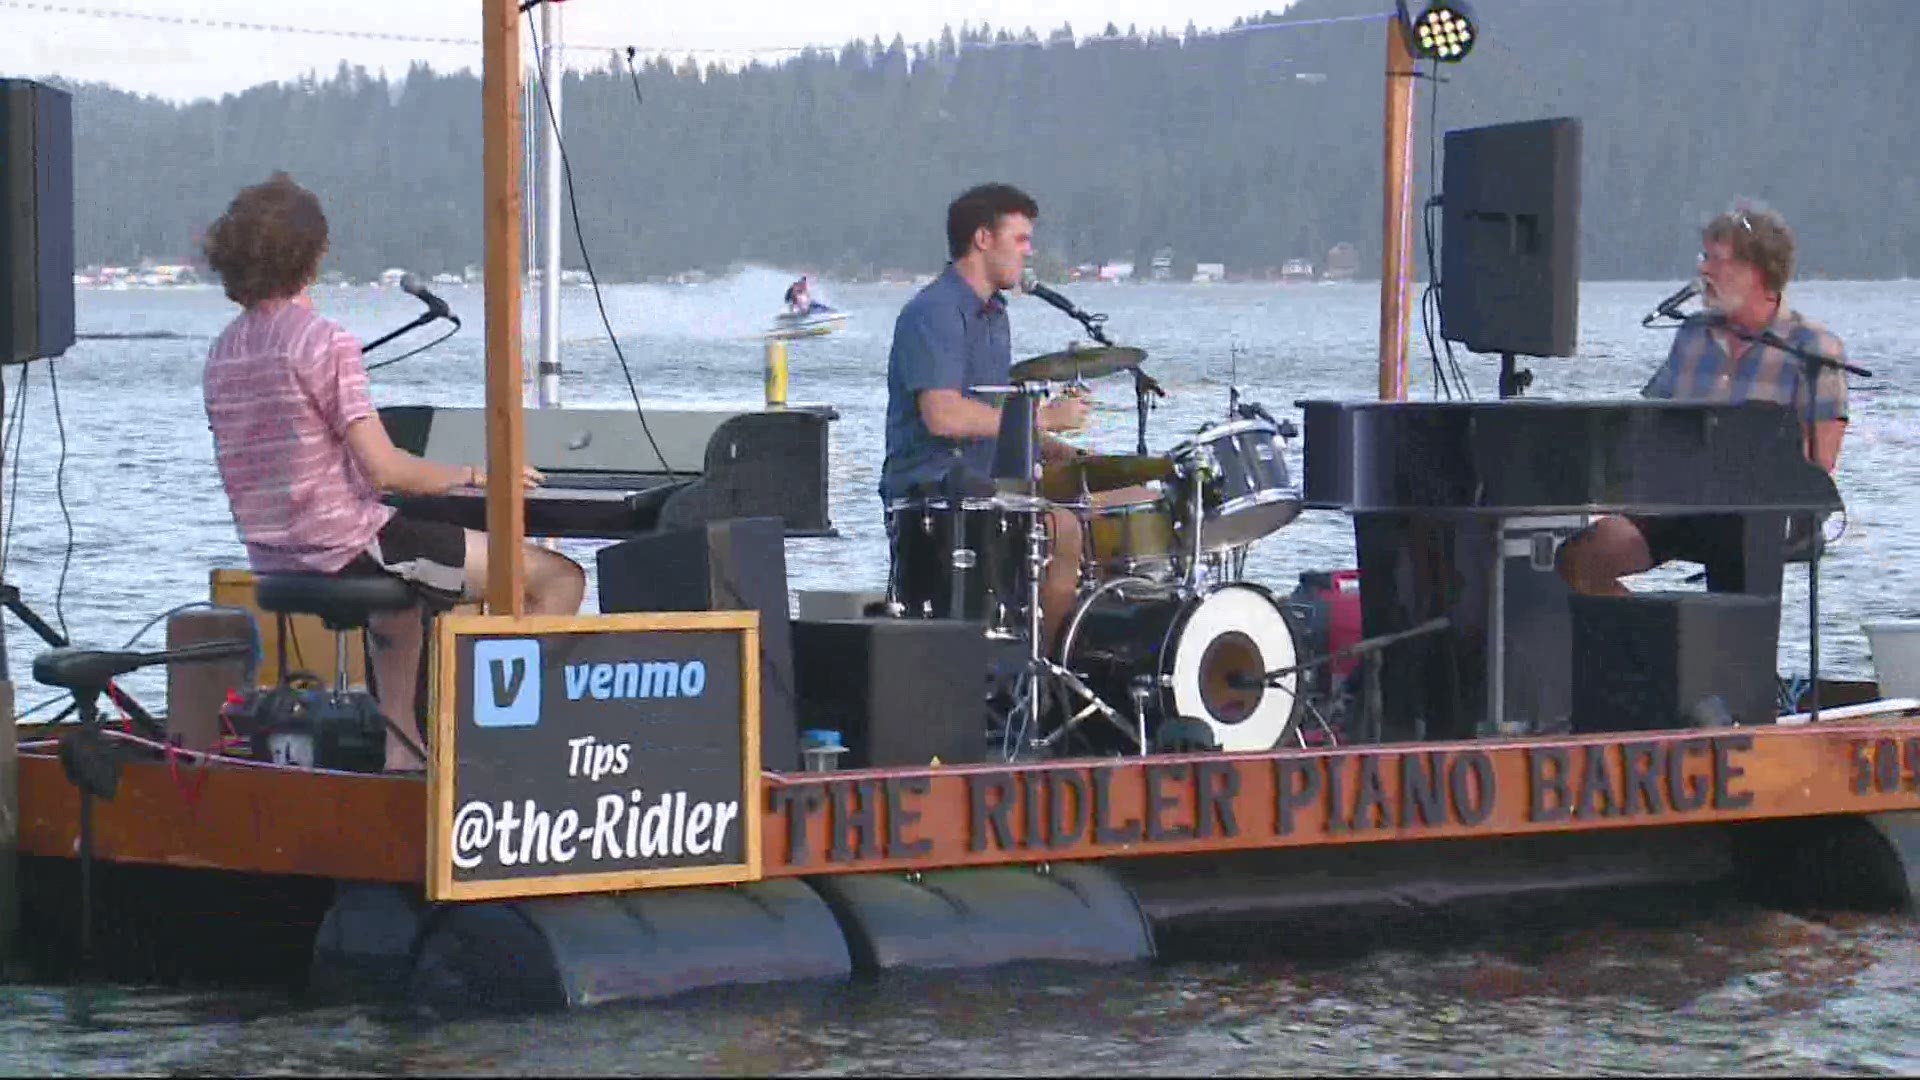 It's been six months since the piano bar in downtown Spokane closed its doors. But the musicians are still playing music from a barge on Deer Lake.